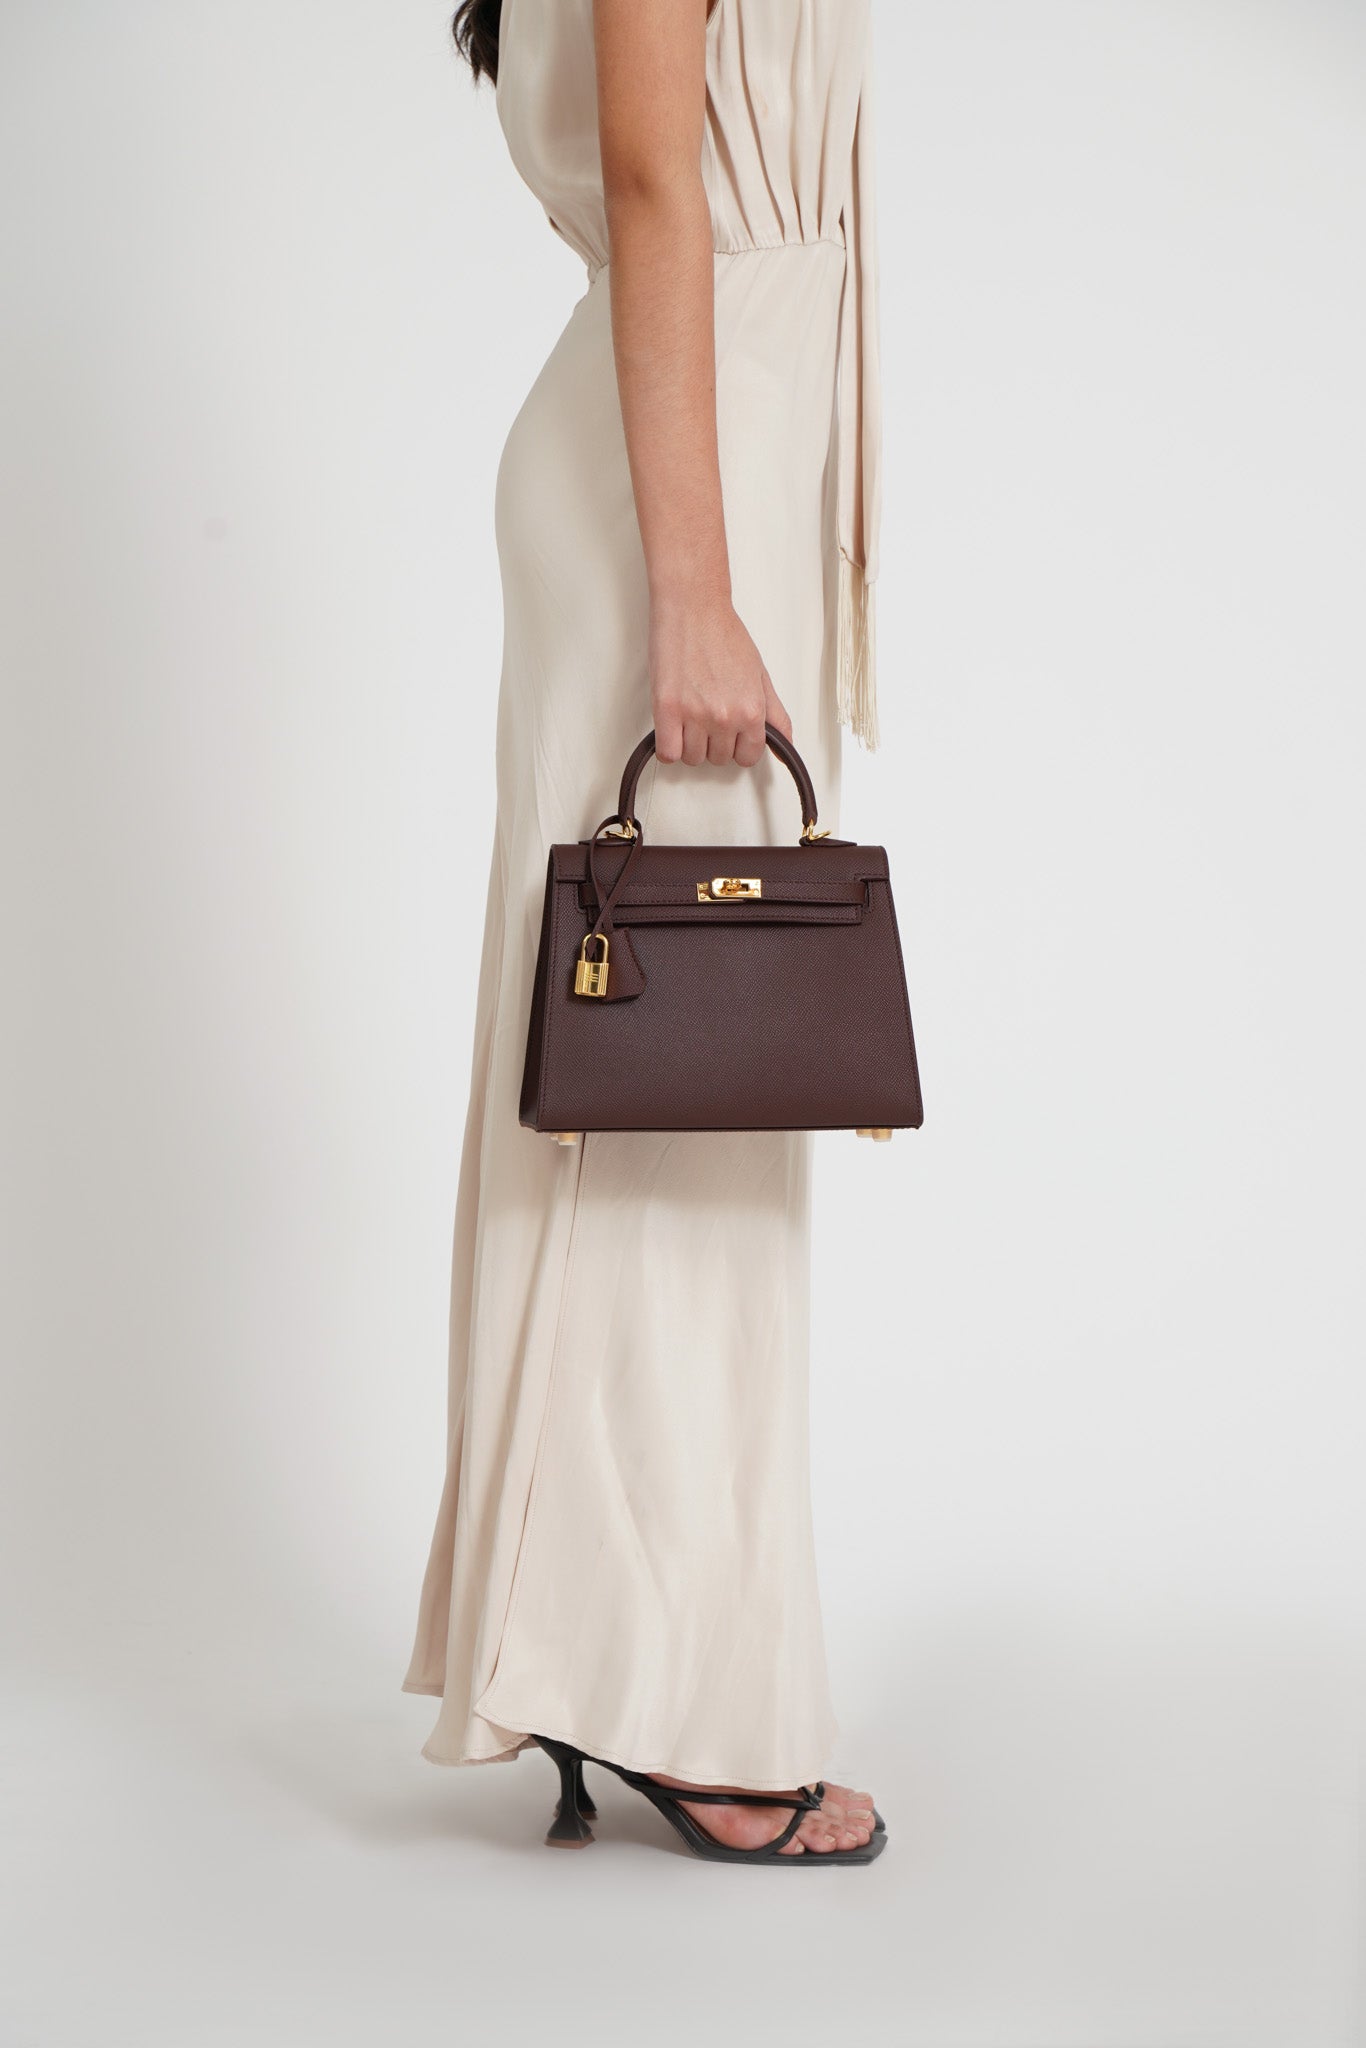 The Grace 25 Satchel Epsom Leather in Etoupe GHW by The Look